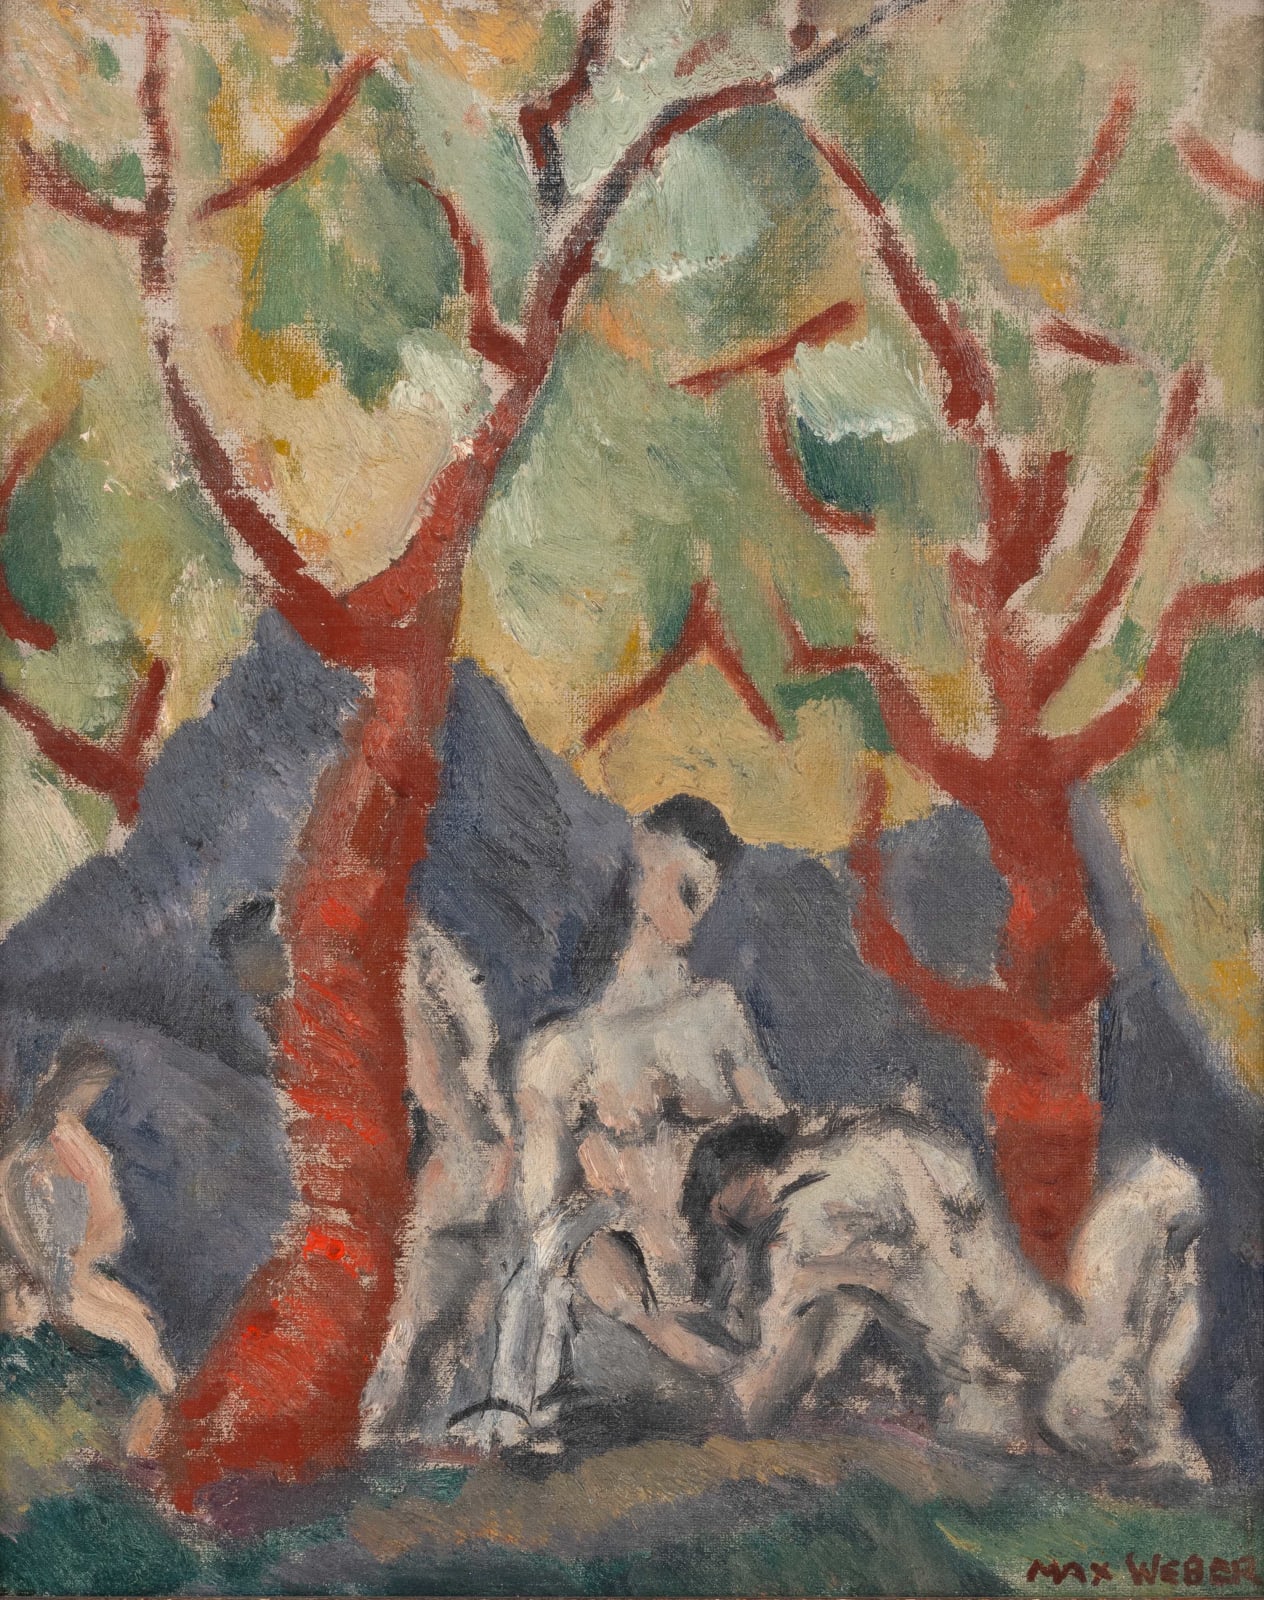 Max Weber, Group of Nudes, c. 1910-11